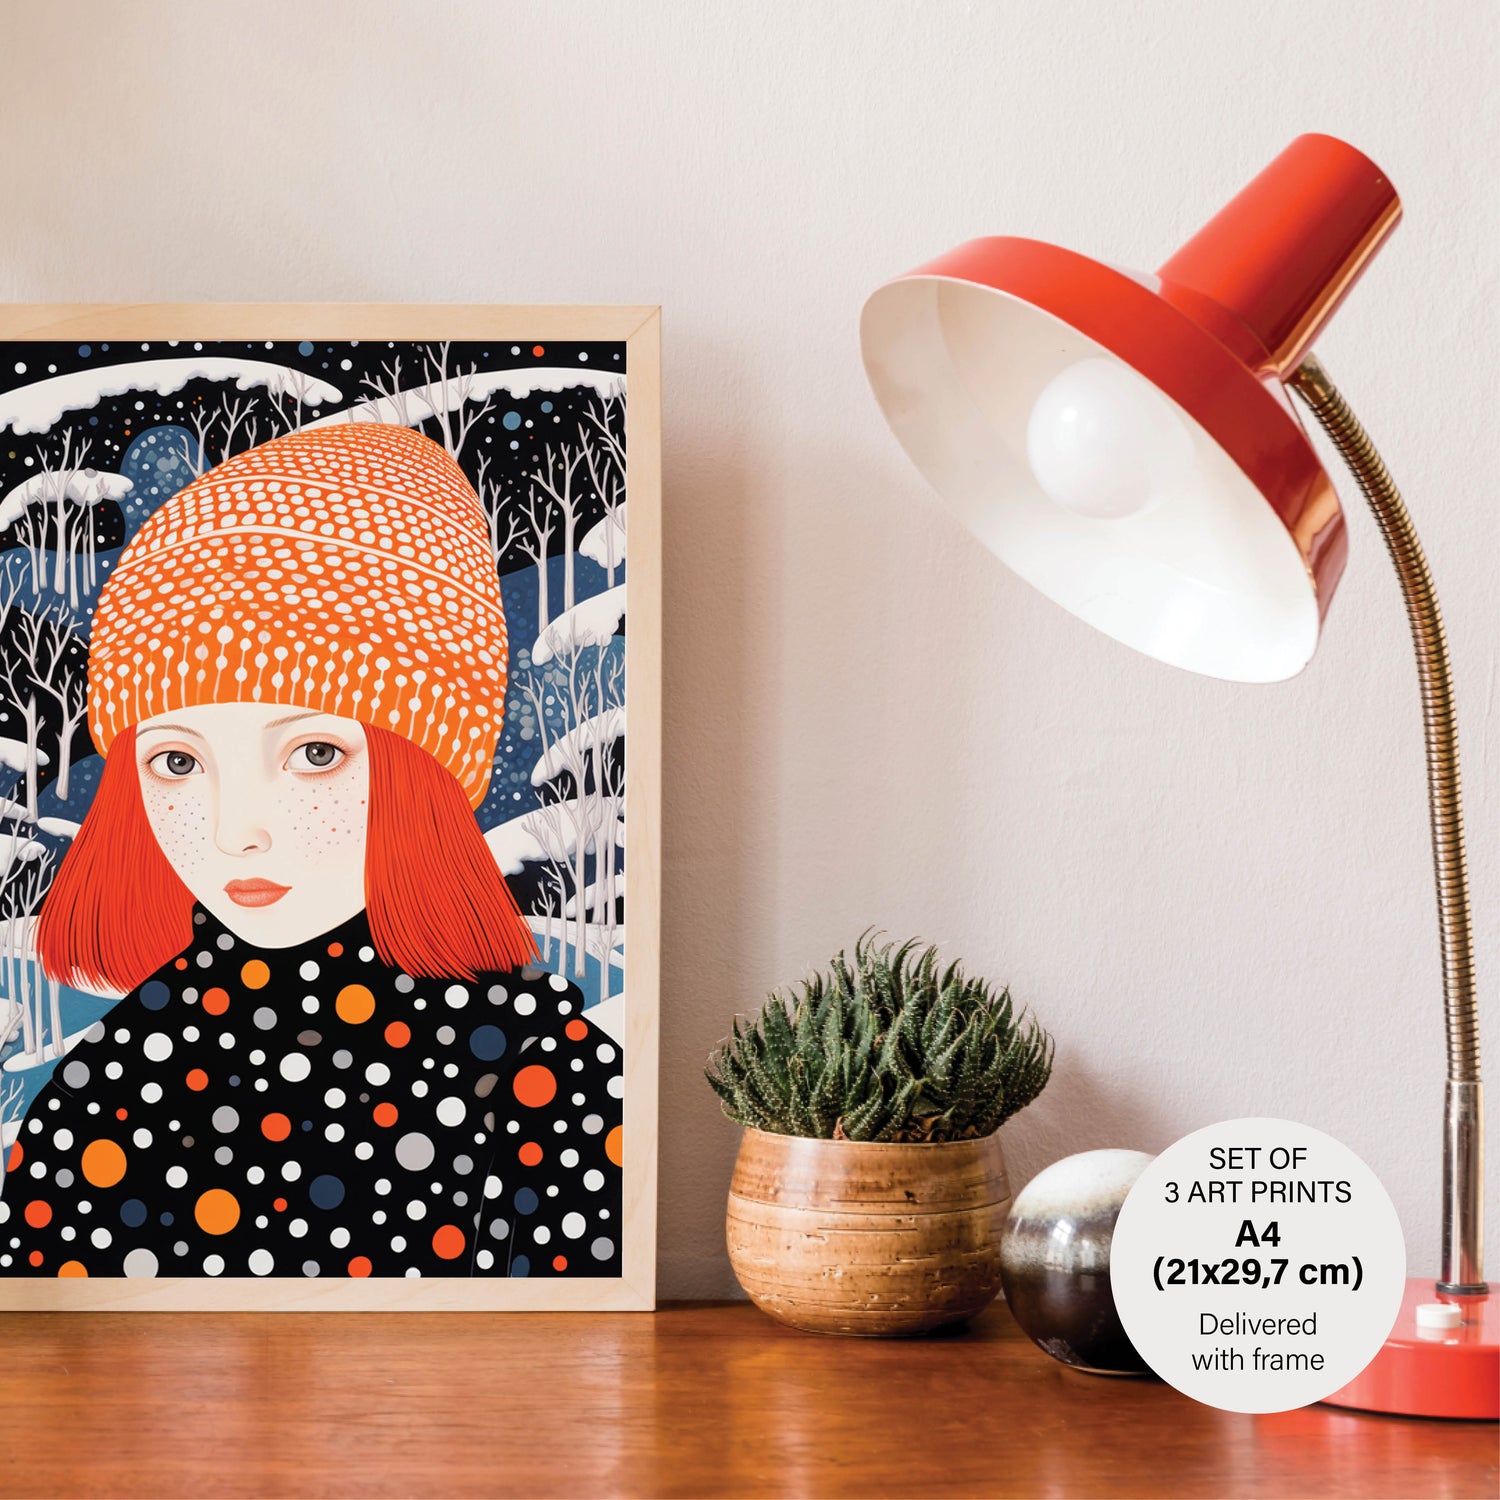 Stylish Polka Dot - The Girl Set - 3 Posters with Frame - Gallery Wall